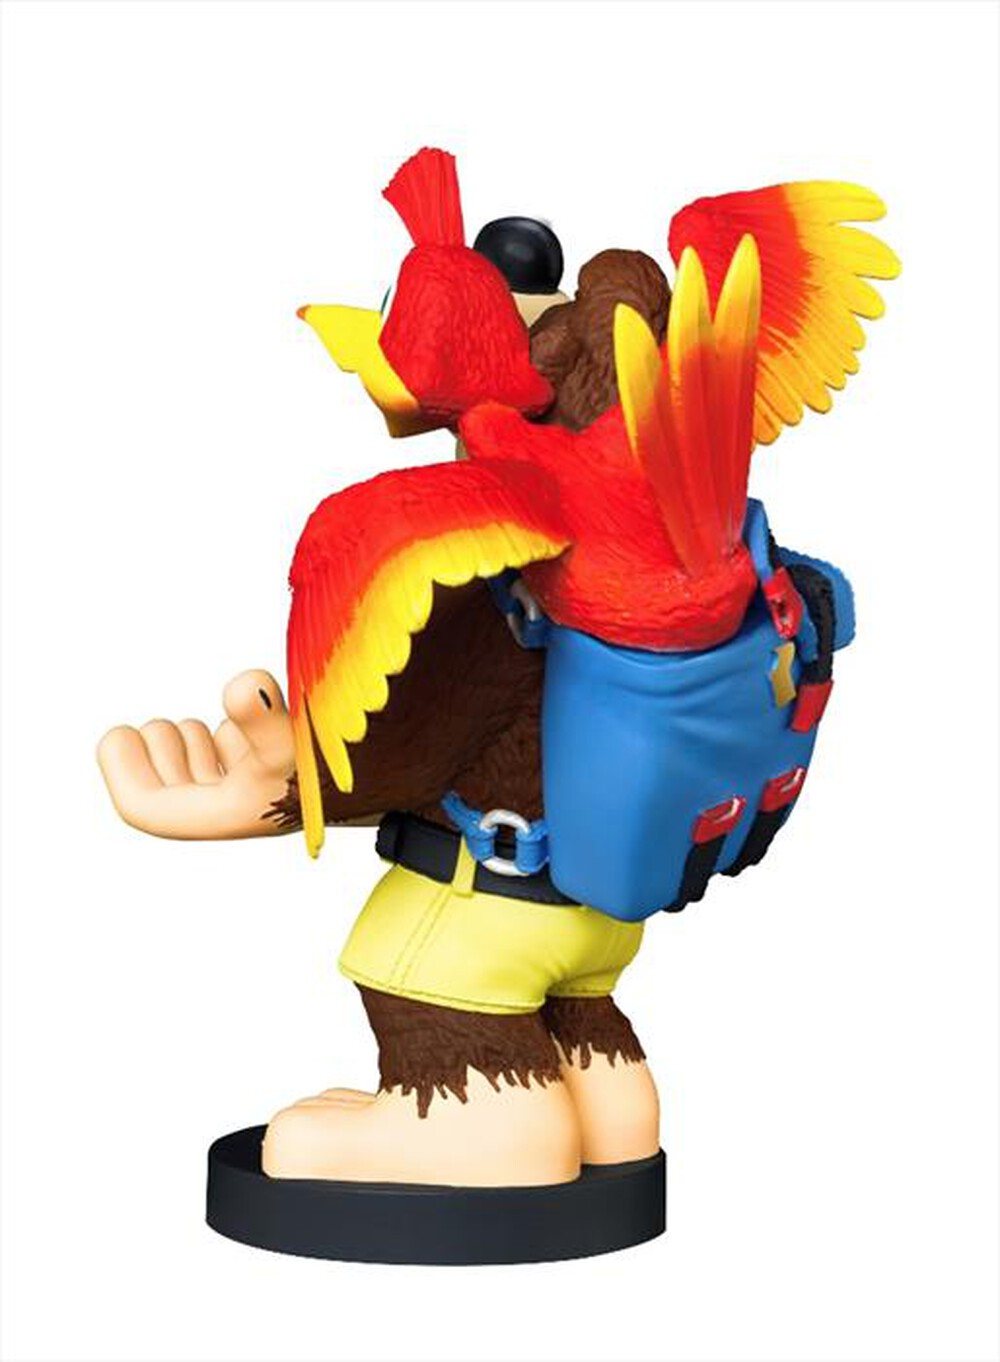 "EXQUISITE GAMING - BANJO KAZOOIE CABLE GUY"